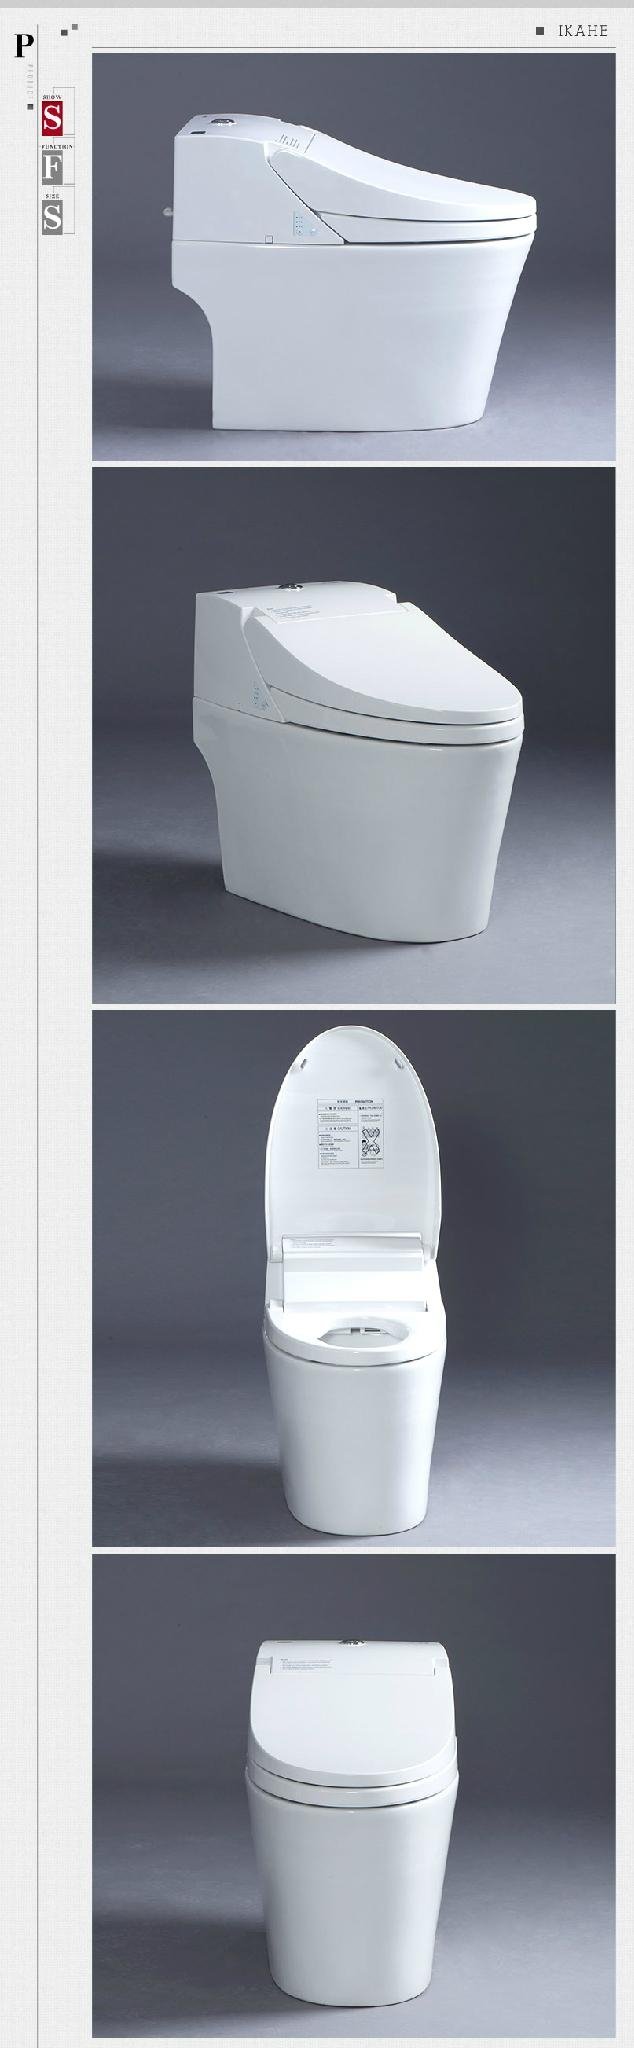 One-piece Intelligent Toilet with Tank, Cotton 2